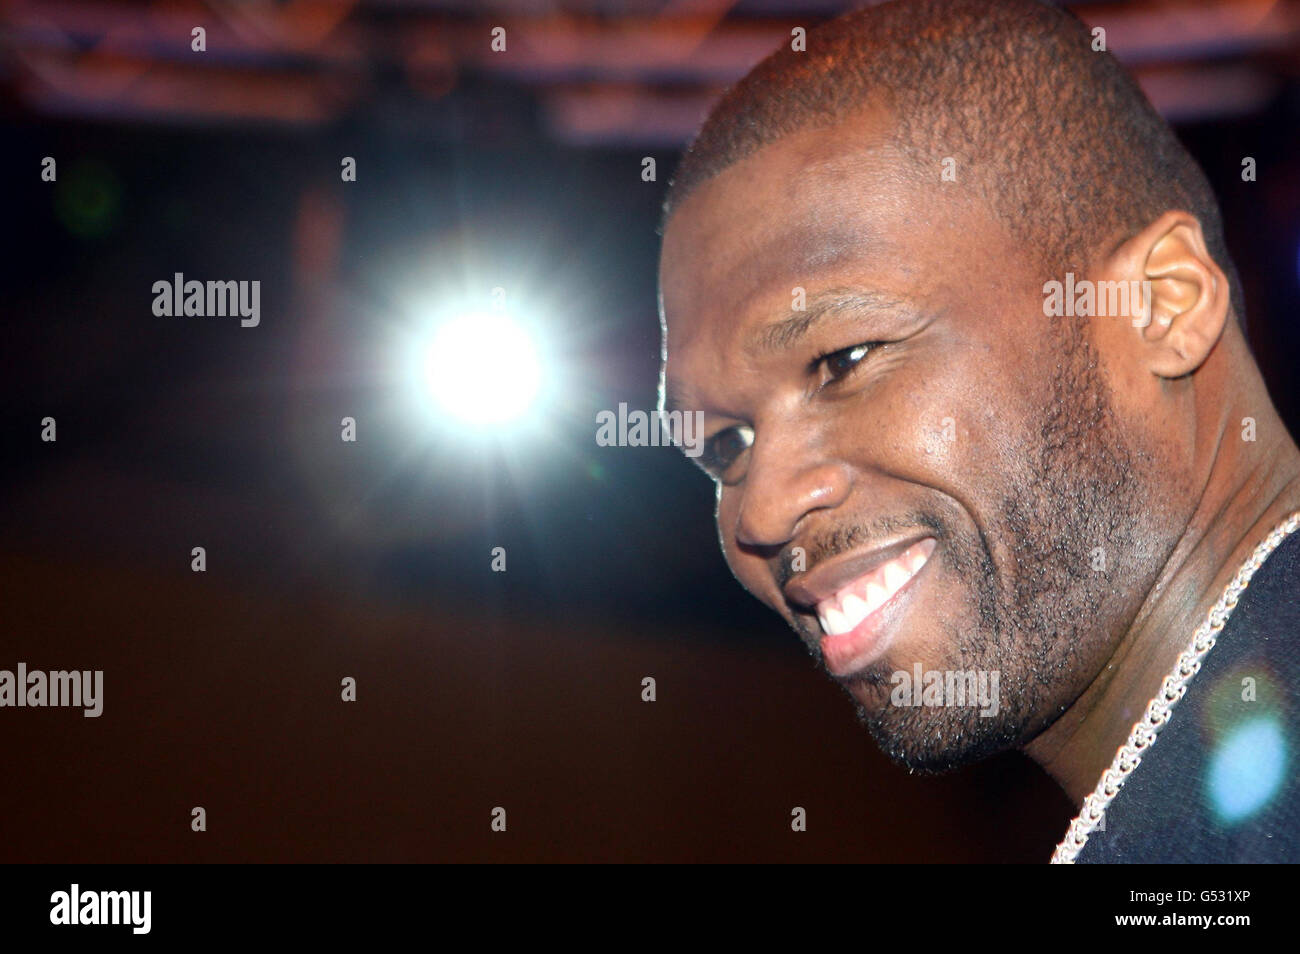 RETRANSMITTED CORRECTING CAPTION Rapper 50 Cent speaking during the launch of his new headphones range at the Gadget Show Live at the NEC Birmingham today. Stock Photo